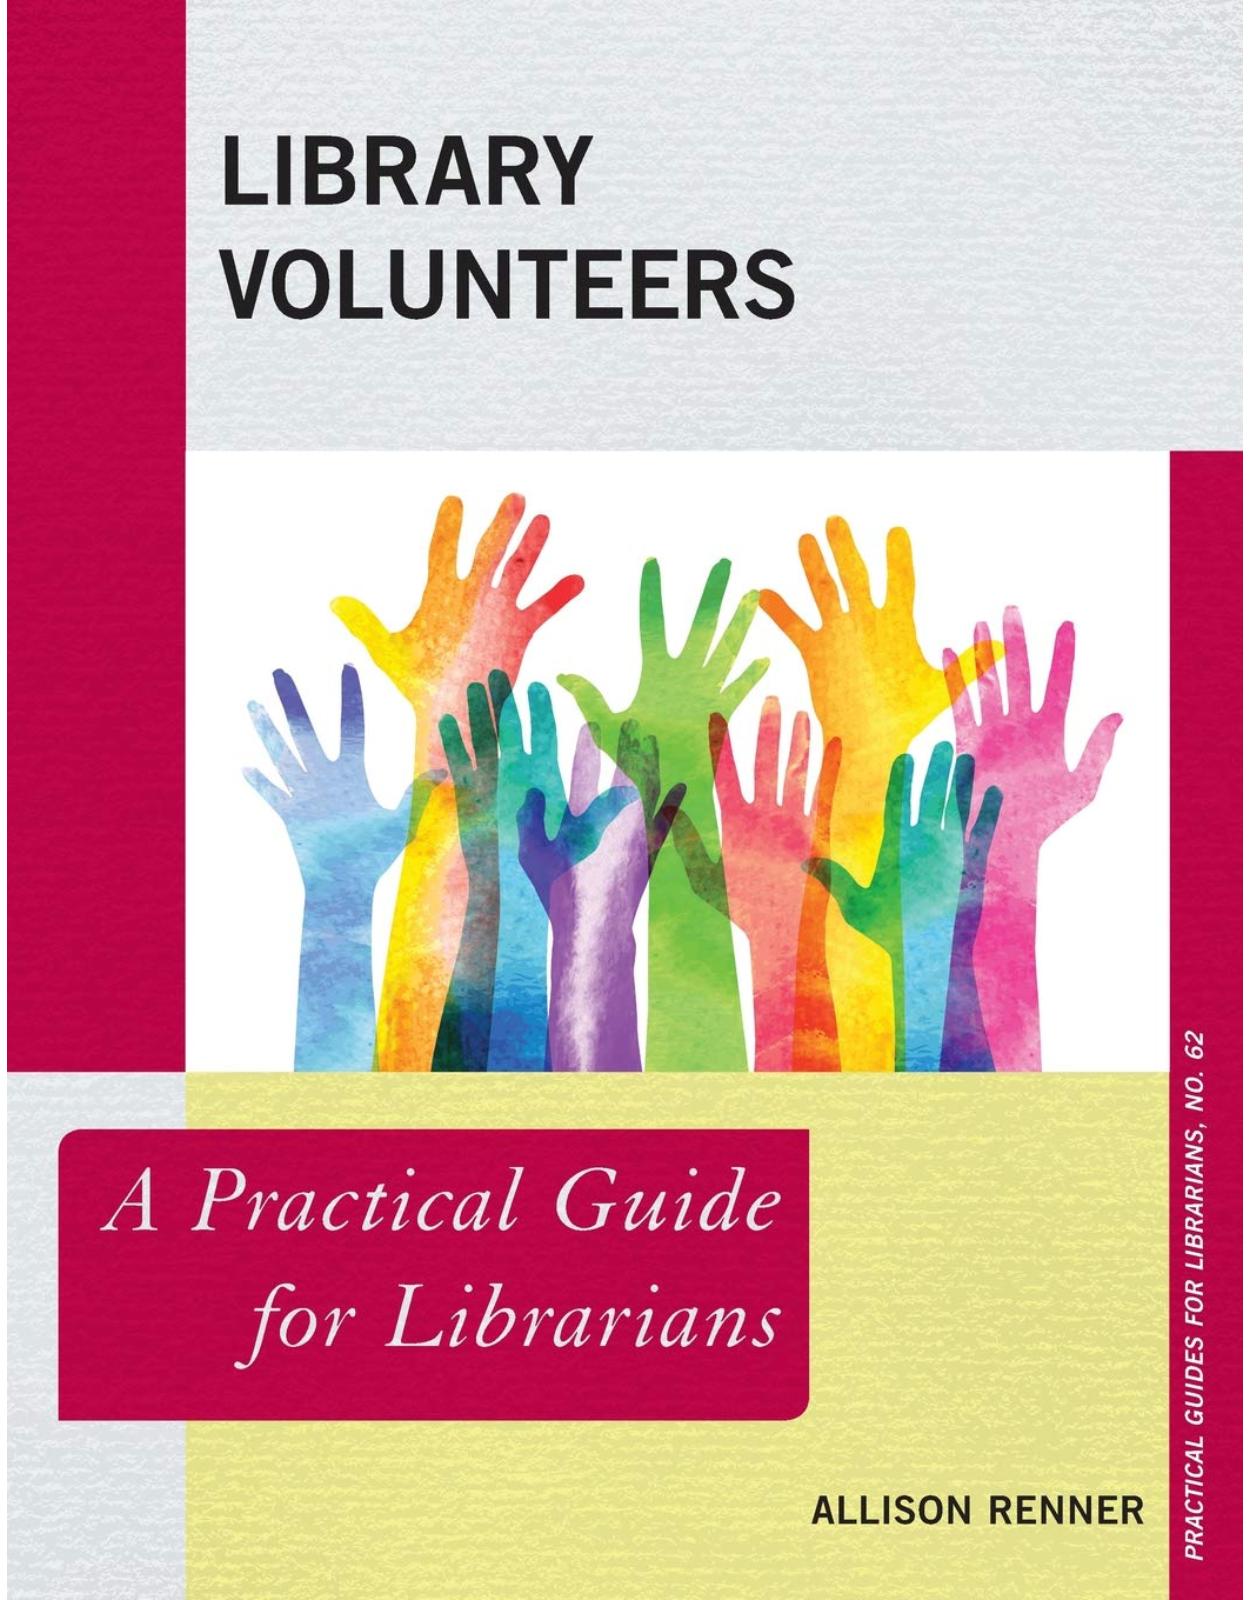 Library Volunteers A Practical Guide for Librarians